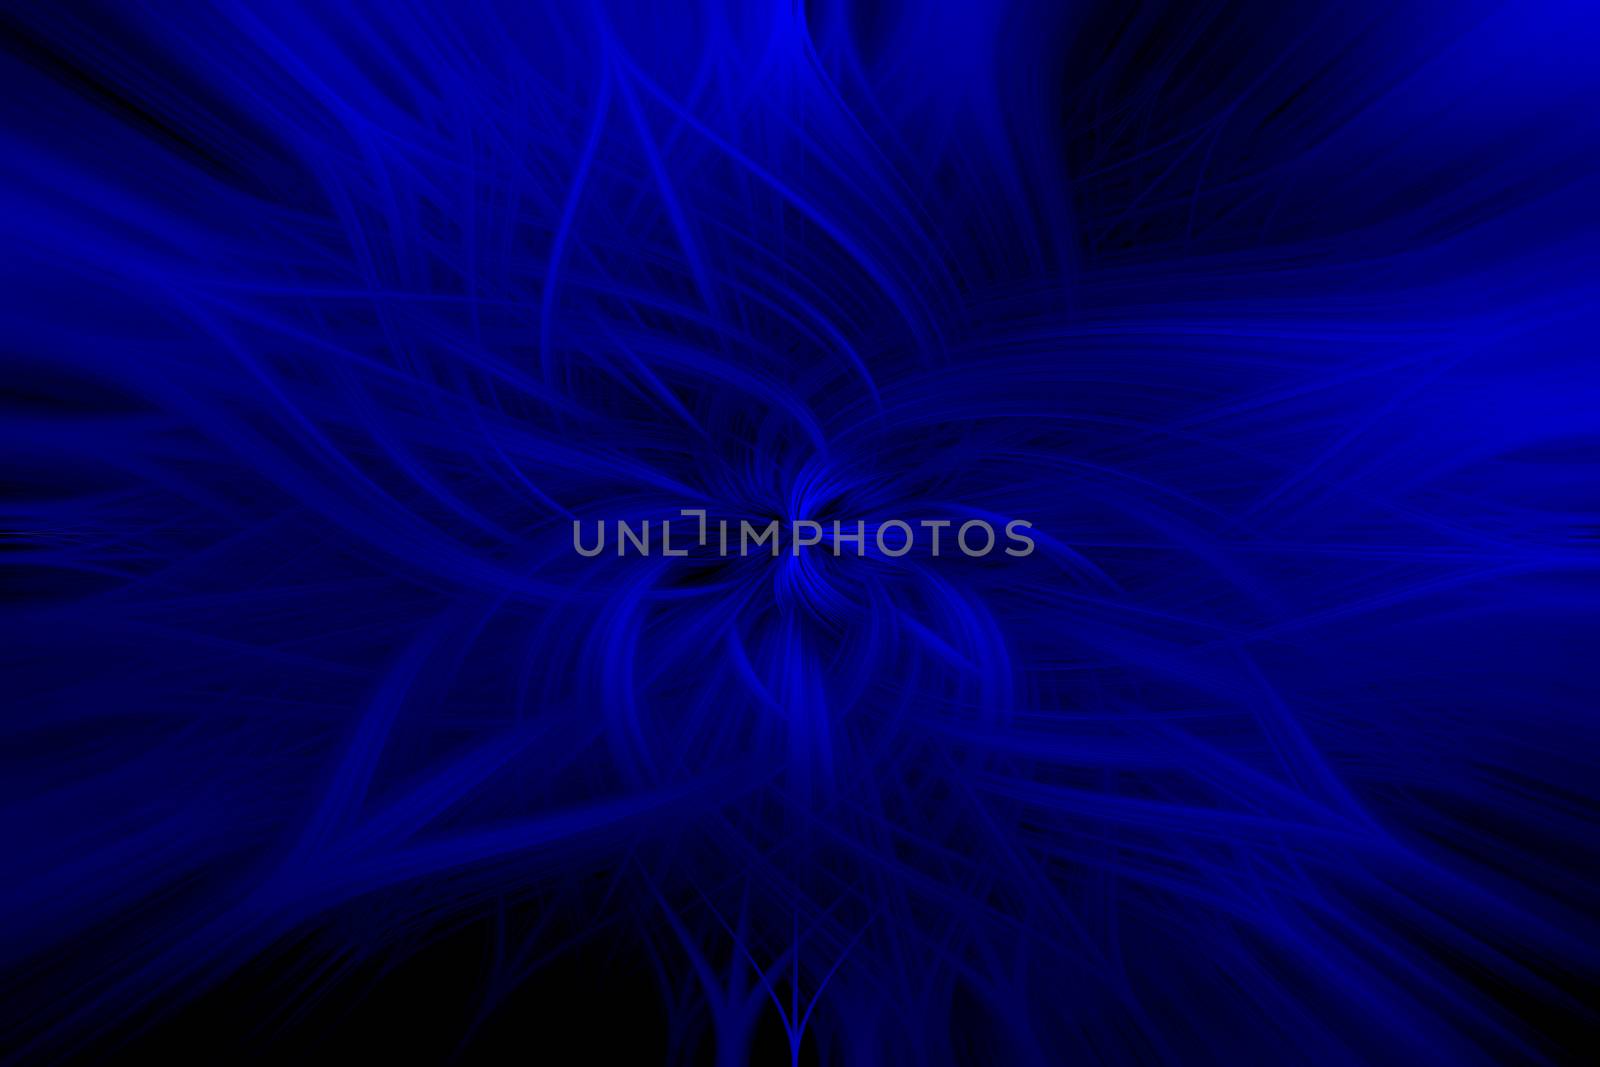 Beautiful abstract intertwined 3d fibers forming an ornament out of various symmetrical shapes. Blue color. Black background. Illustration.